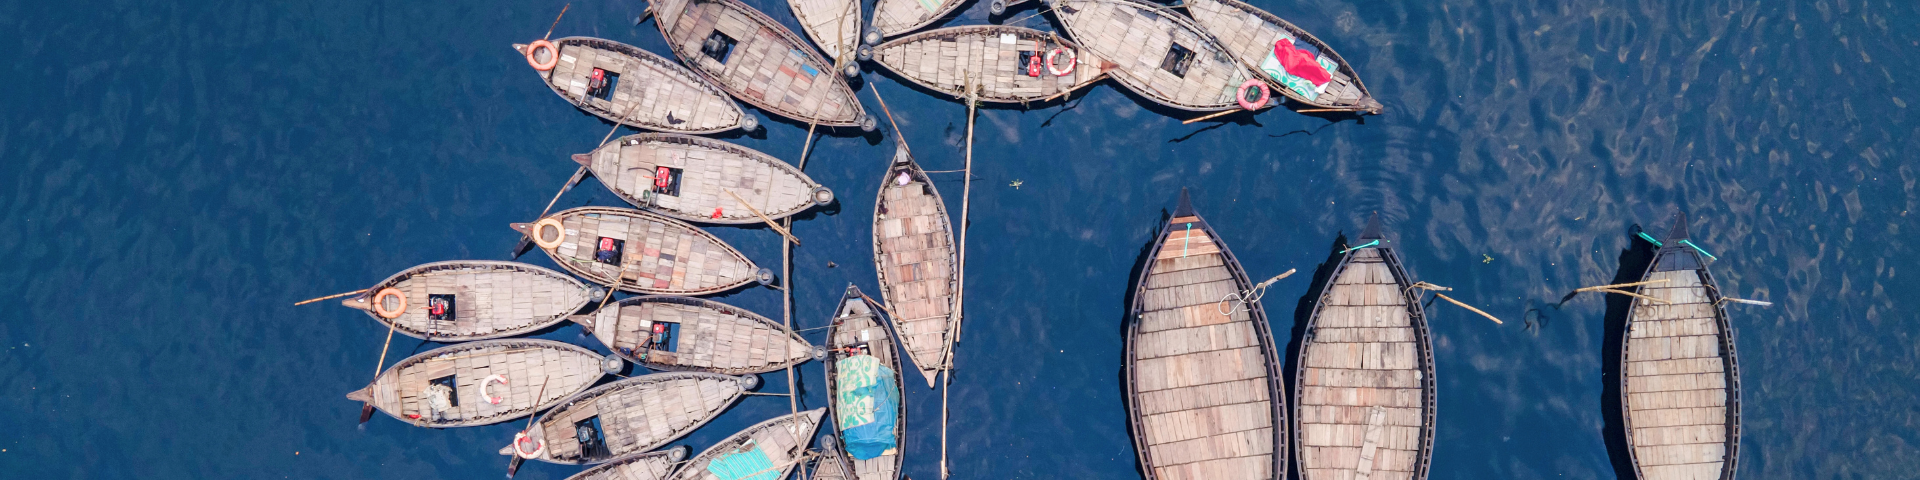 Aerial view of a group of boats clustered together in the ocean